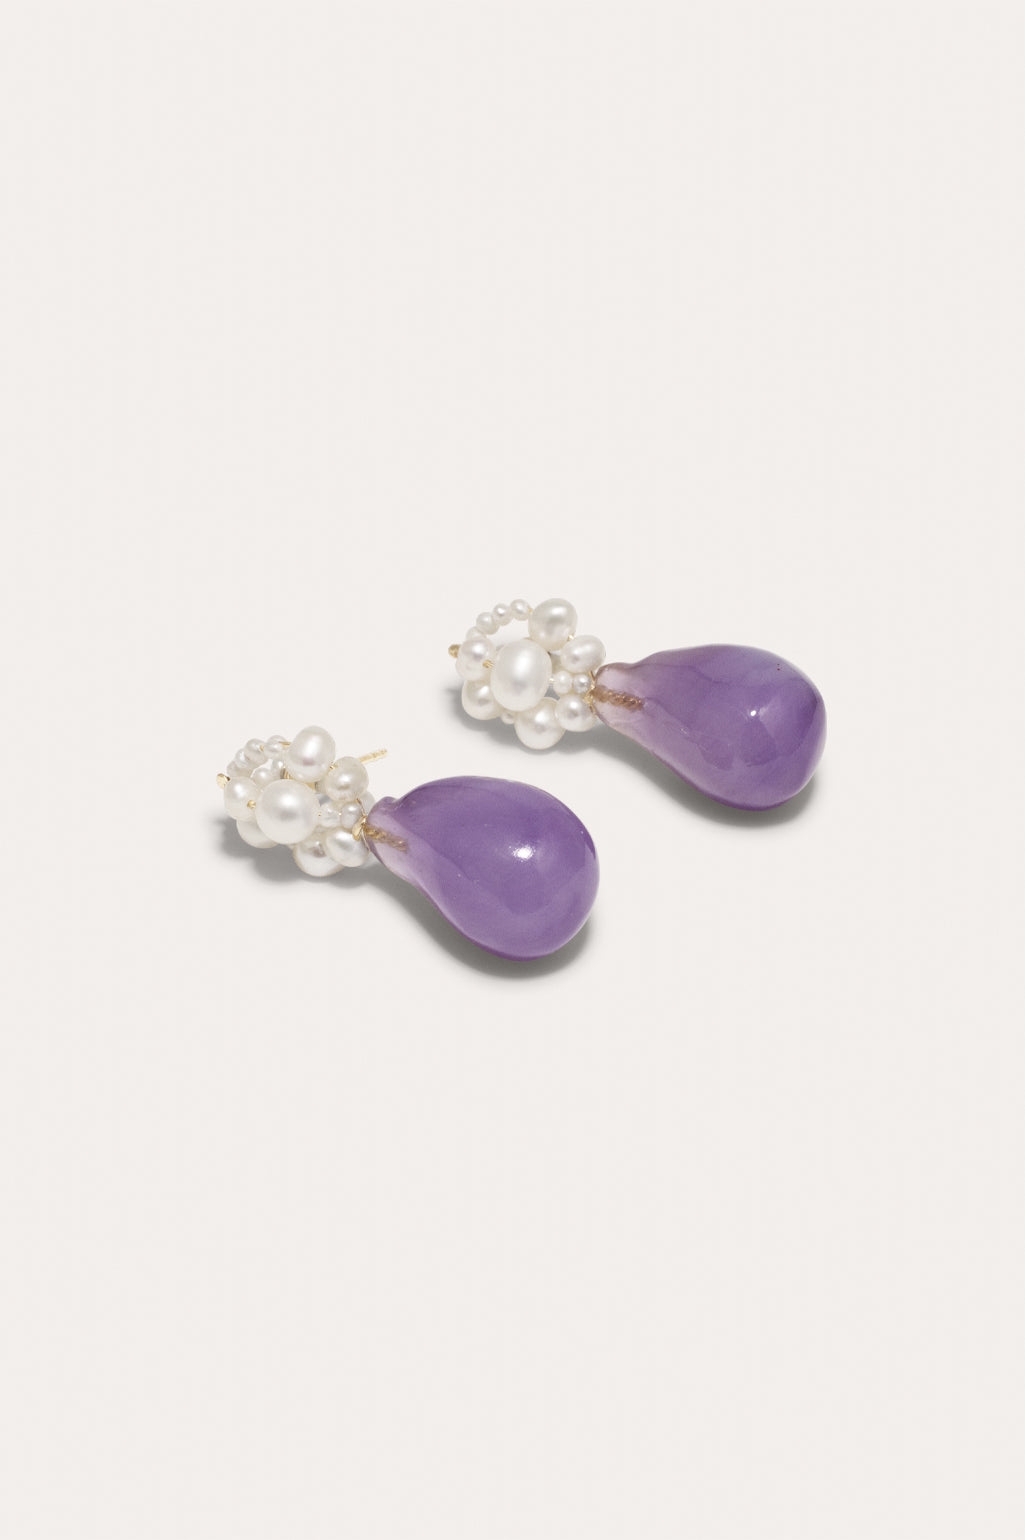 Tra‐la‐la Pearl and Lilac Resin Gold Vermeil Earrings